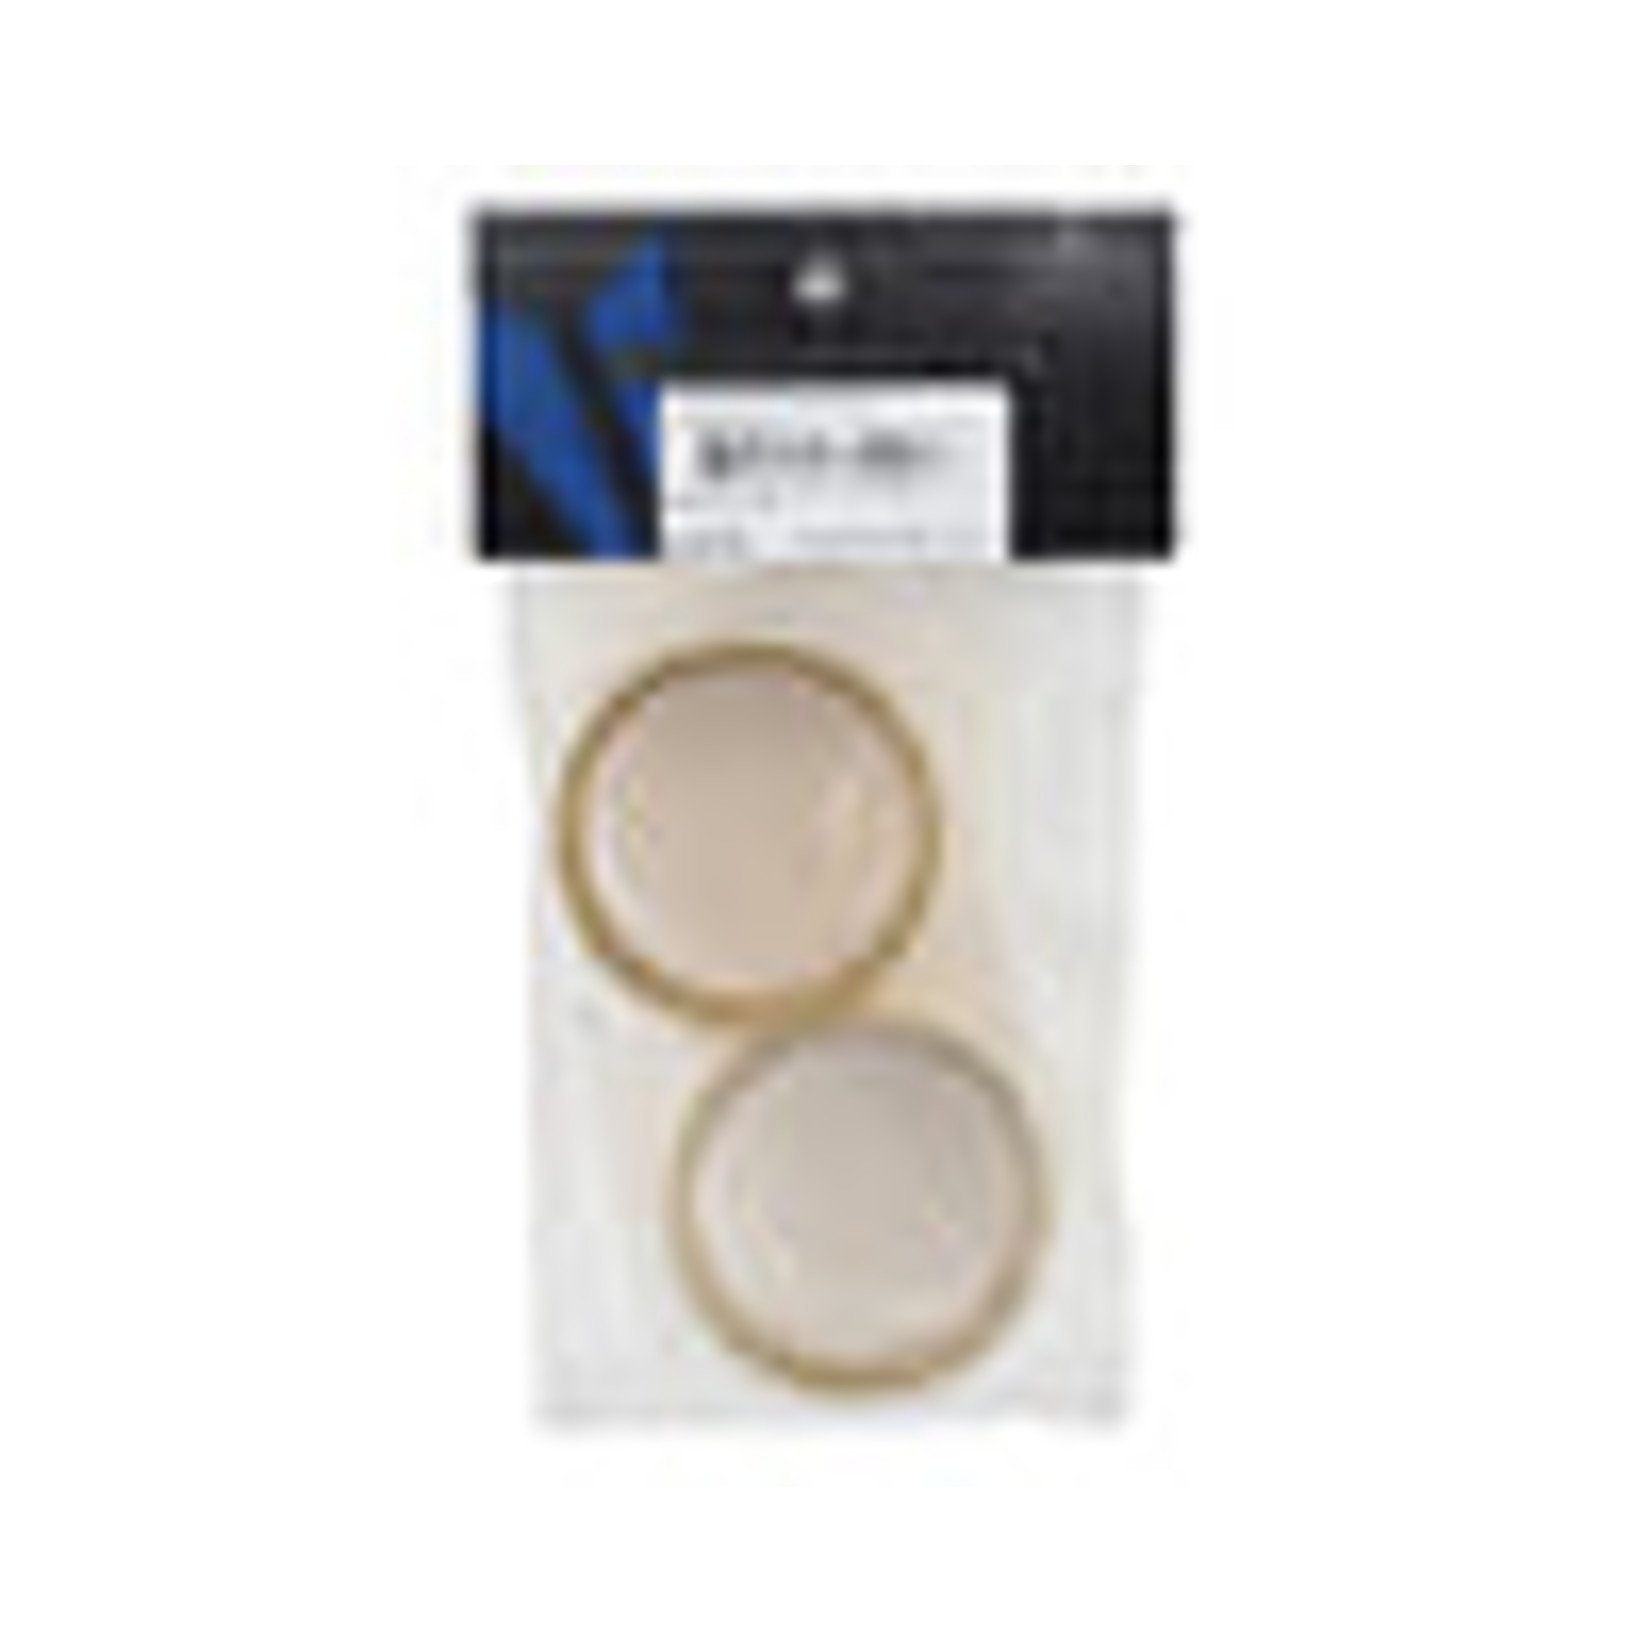 Vanquish Products VPS05254 Vanquish Products Brass 1.0" 1.9 Wheel Clamp Rings (2)